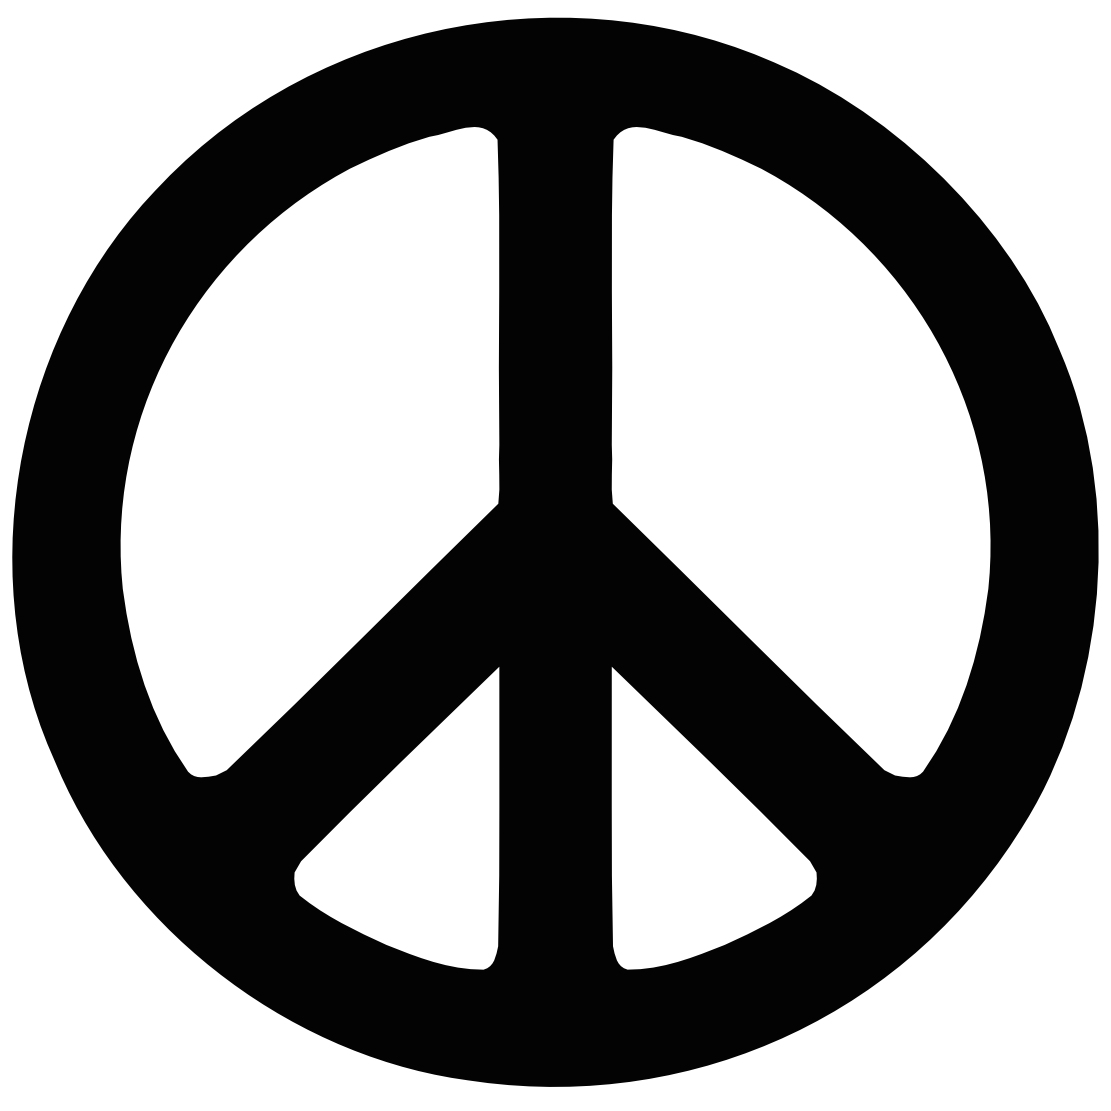 Coloring pages peace signs - Coloring Pages & Pictures - IMAGIXS